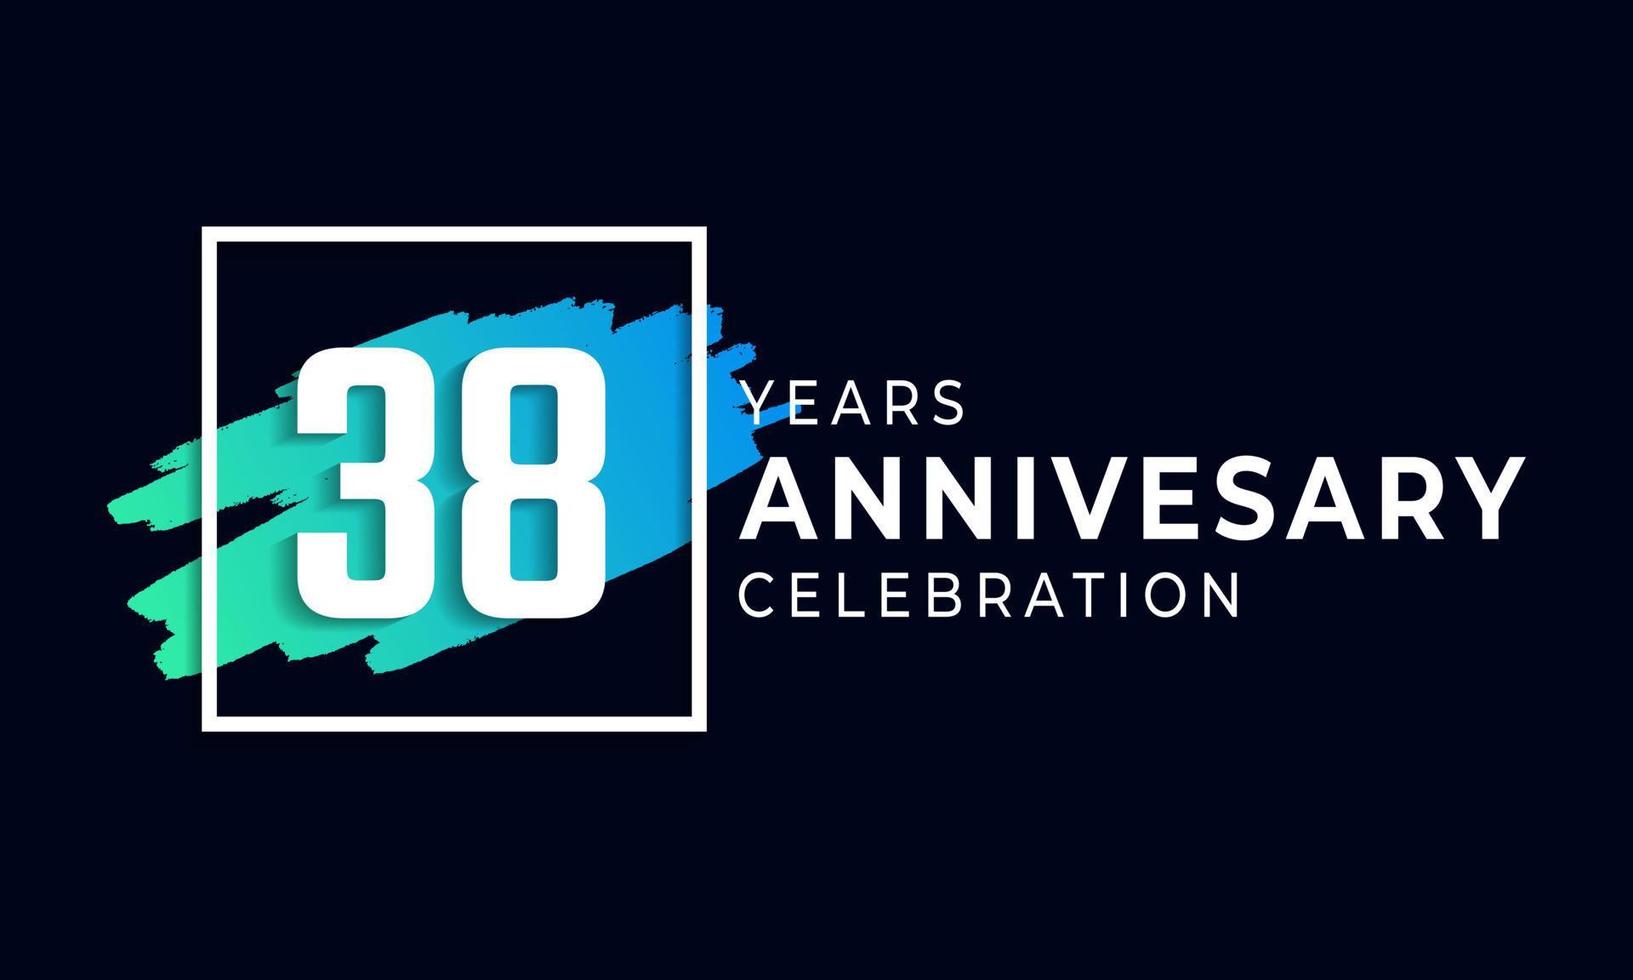 38 Year Anniversary Celebration with Blue Brush and Square Symbol. Happy Anniversary Greeting Celebrates Event Isolated on Black Background vector